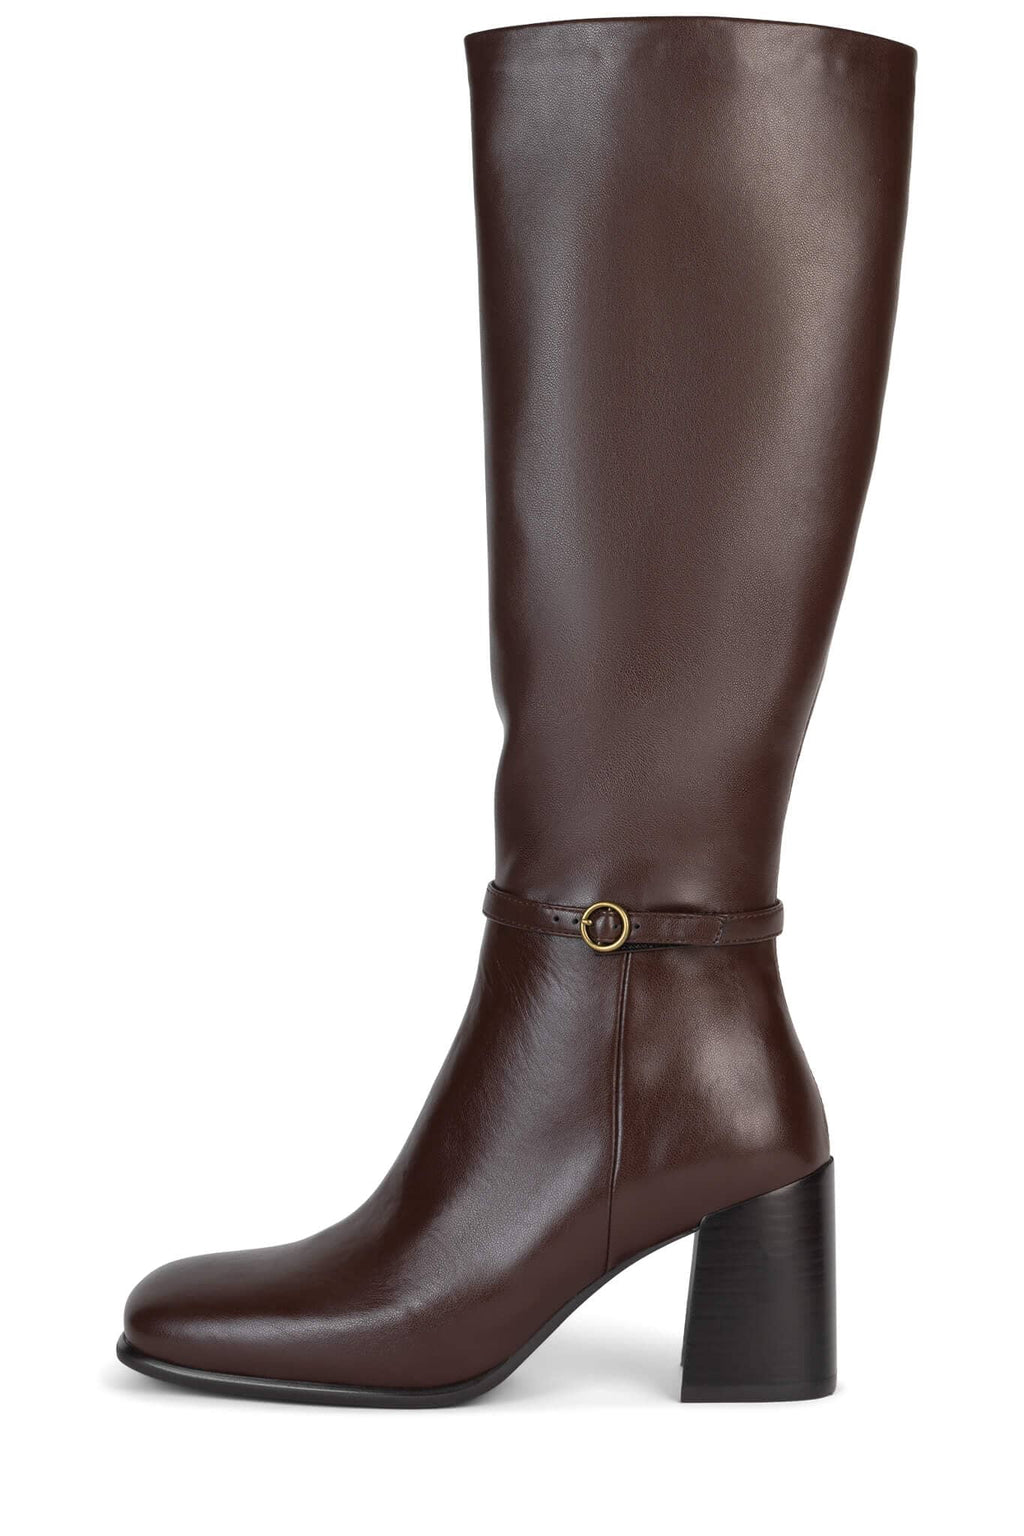 FINDLAY Knee-High Boot STRATEGY Brown 6 